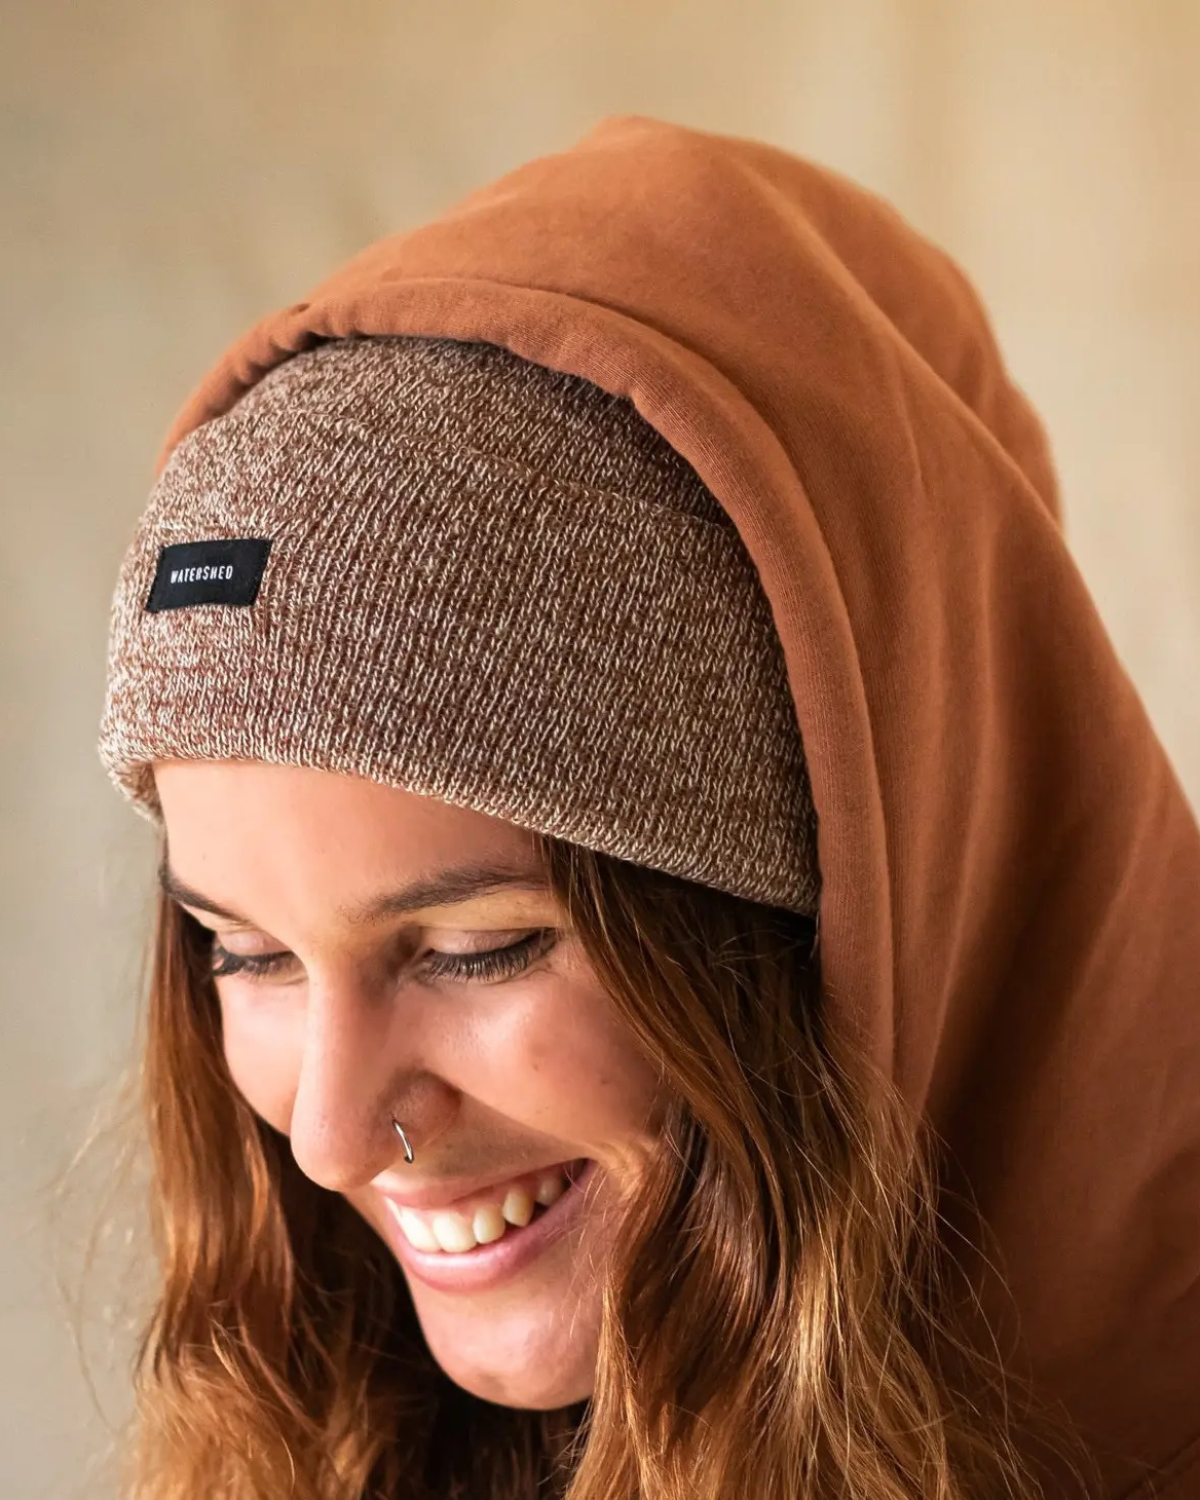 Watershed Issue Beanie - Tan Marl